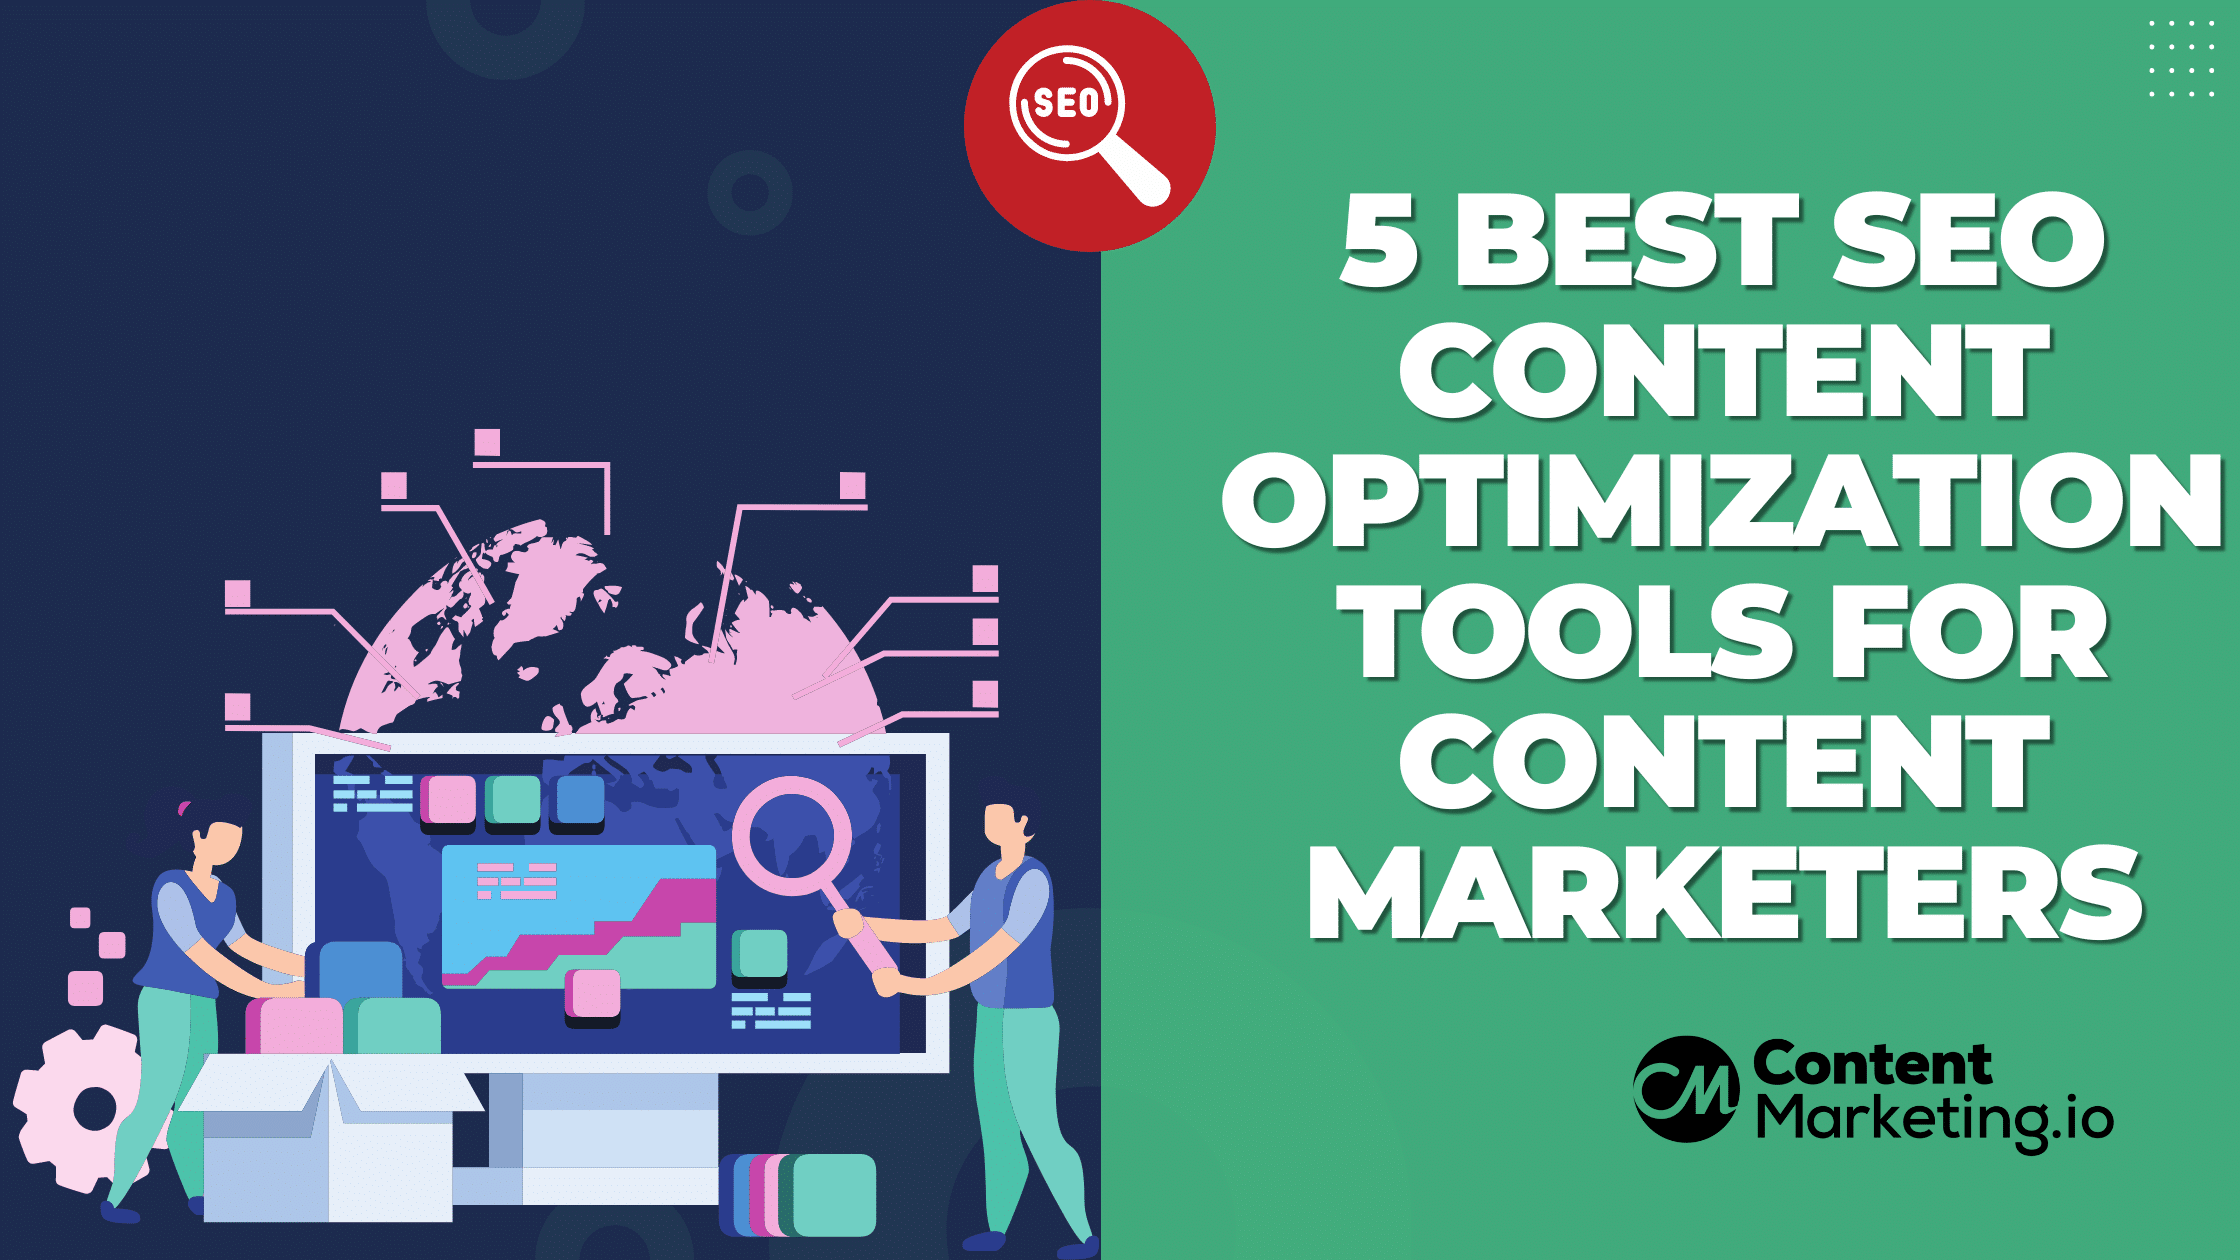 5 Best SEO Content Optimization Tools for Content Marketers